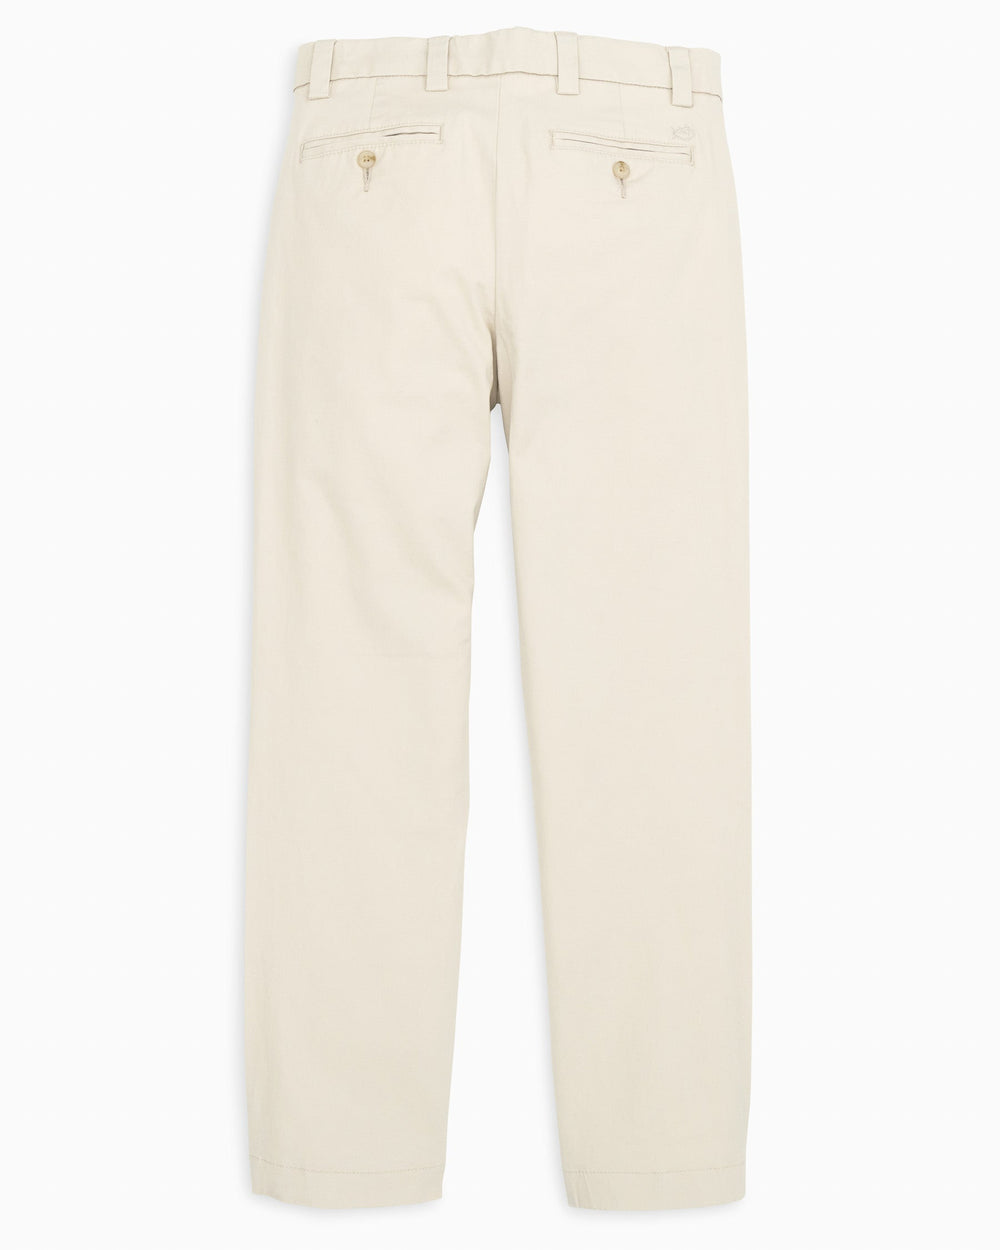 The back view of the Boys Channel Marker Pant by Southern Tide - Light Khaki